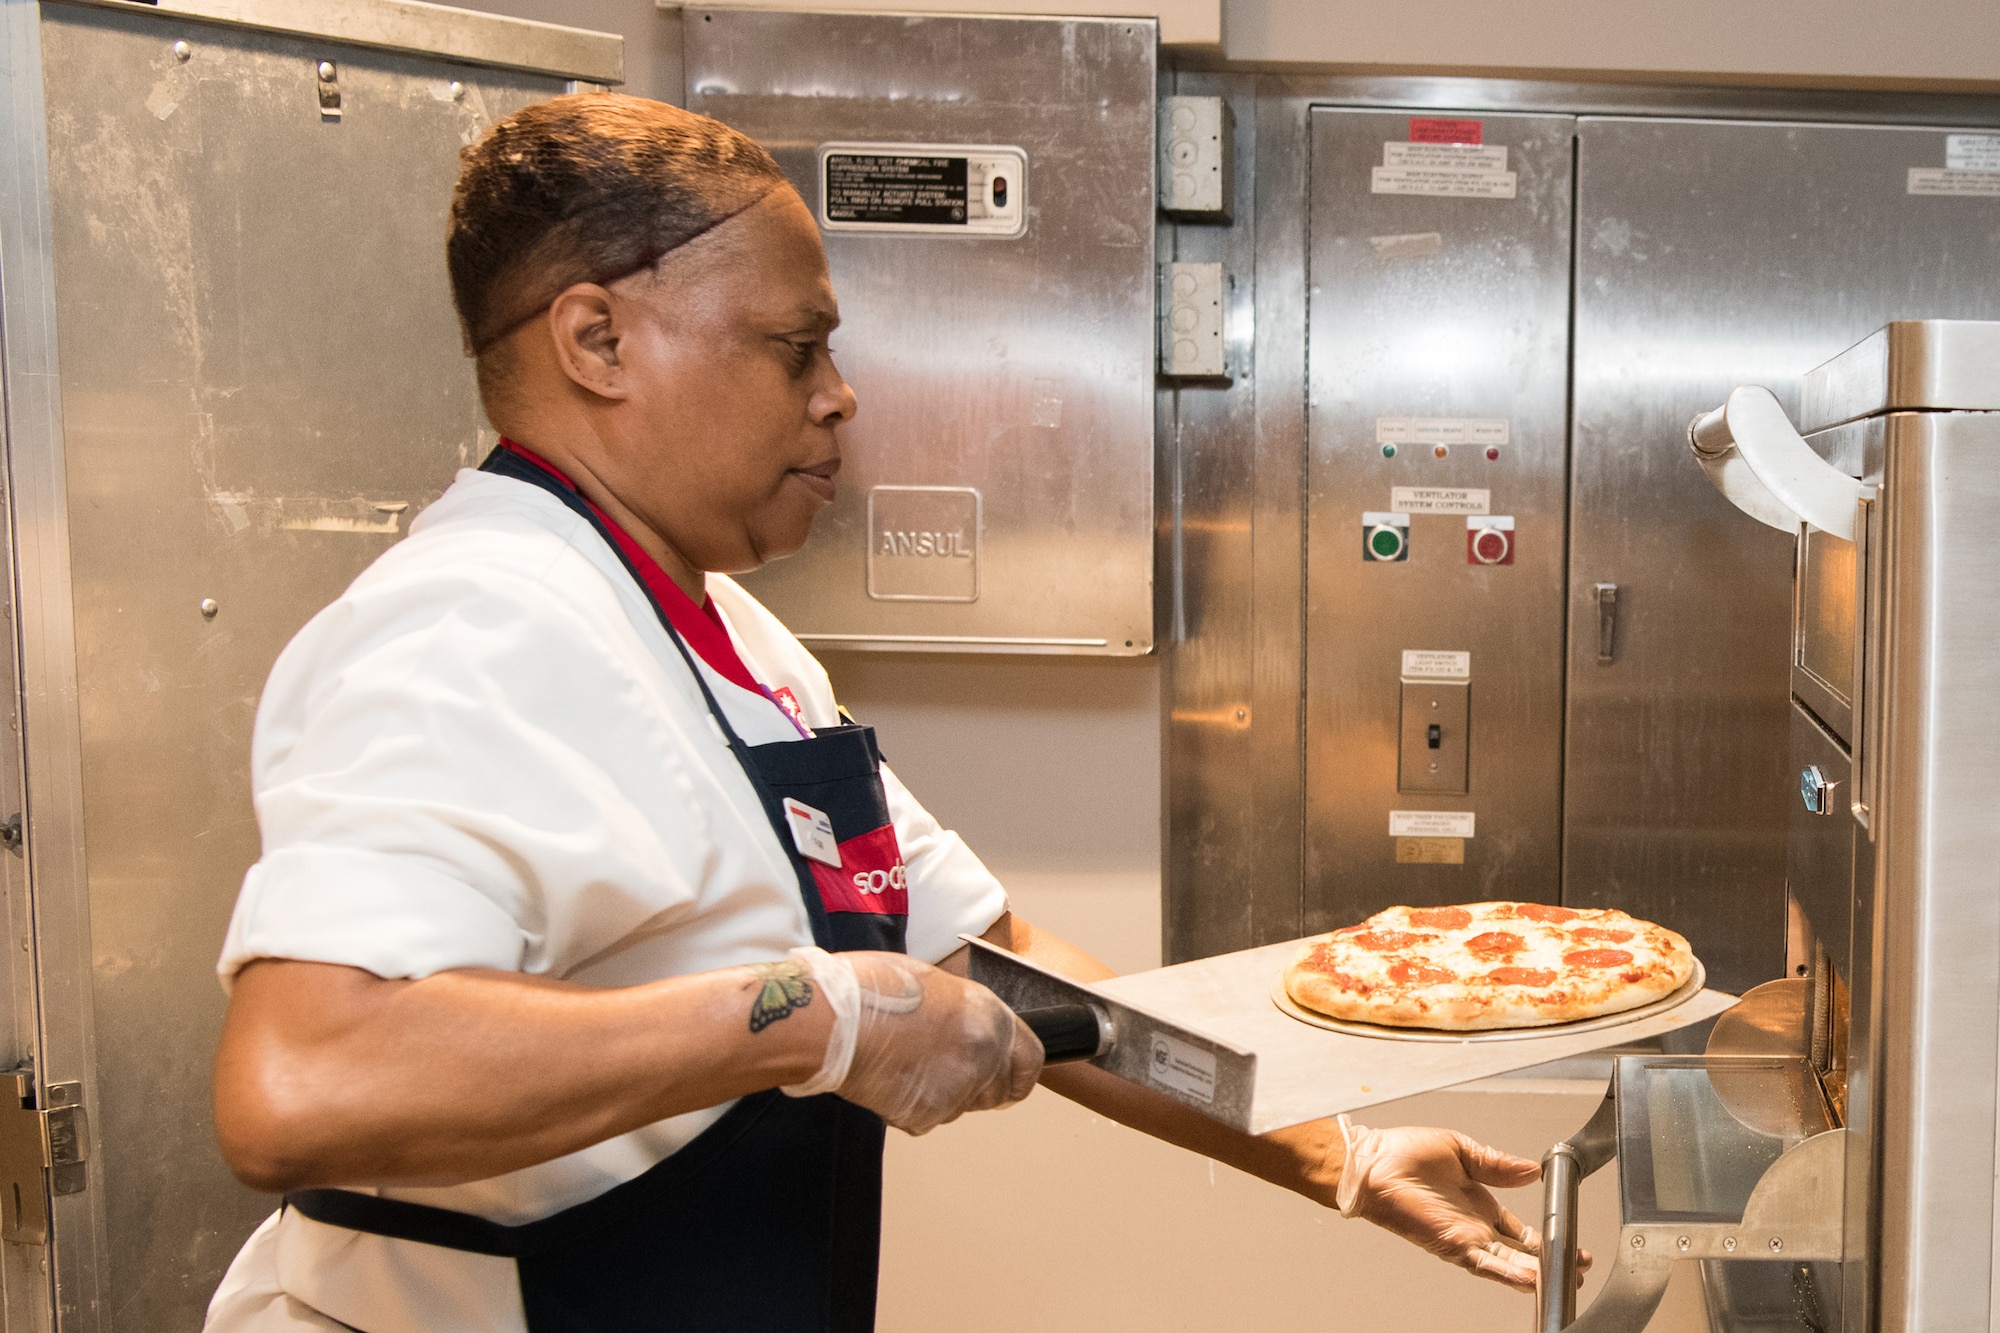 Pamela Marshall, Sodexo cook, pulls a pizza out of the oven June 11, 2019, at the Patterson Dining Facility, Dover Air Force Base, Del. The Slice of Life pizza station offers DFAC patrons fresh-baked personal pan pizzas with traditional toppings, as well as specialty pizzas. (U.S. Air Force photo by Mauricio Campino)